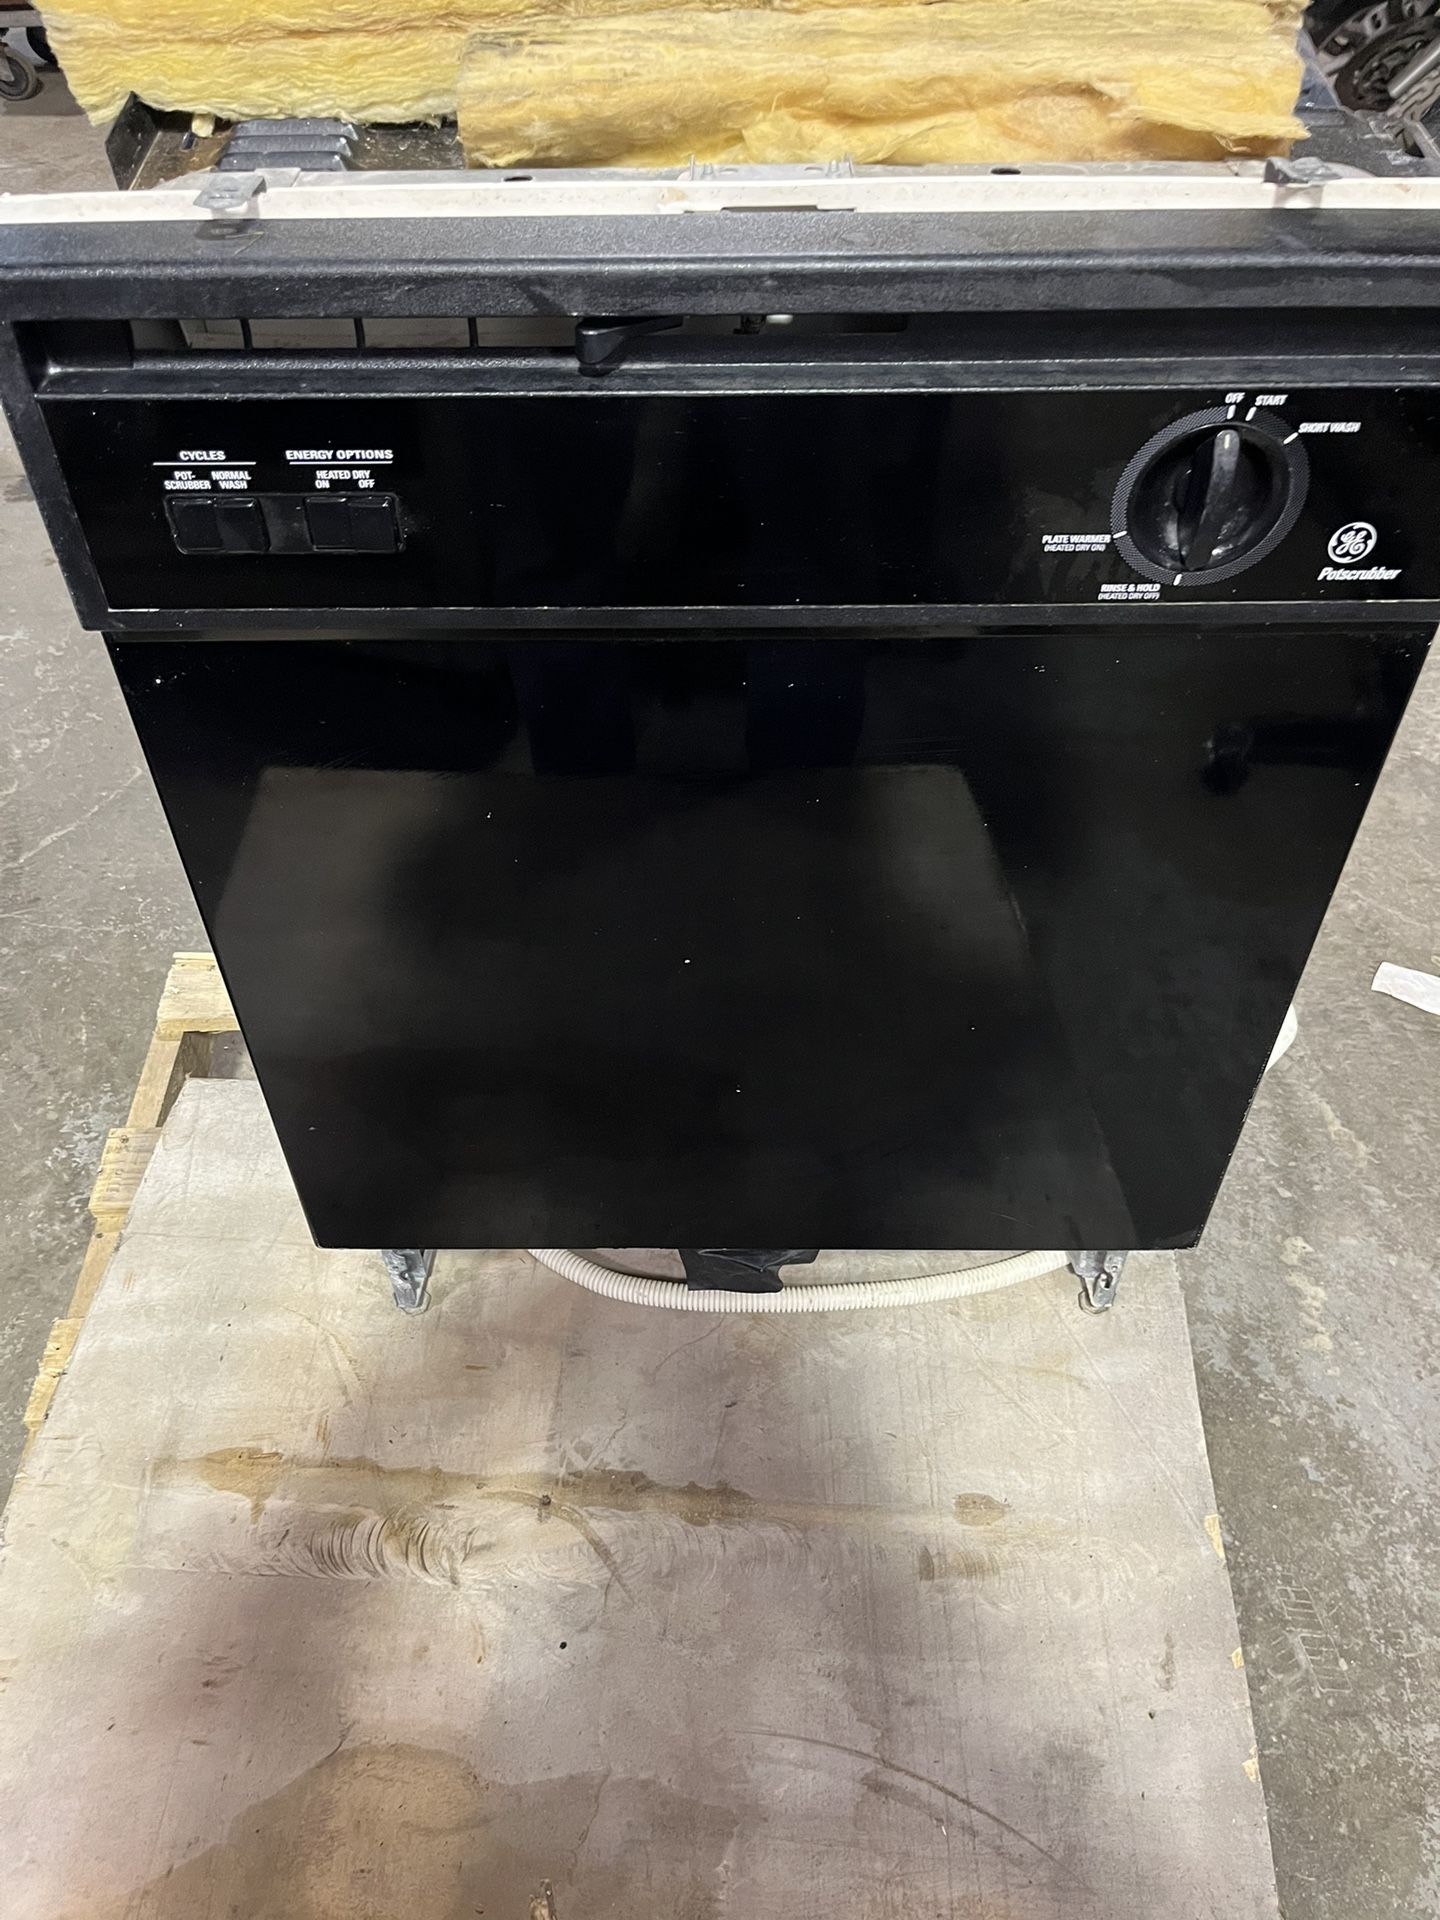 Used Dishwasher - Works Great & Clean 